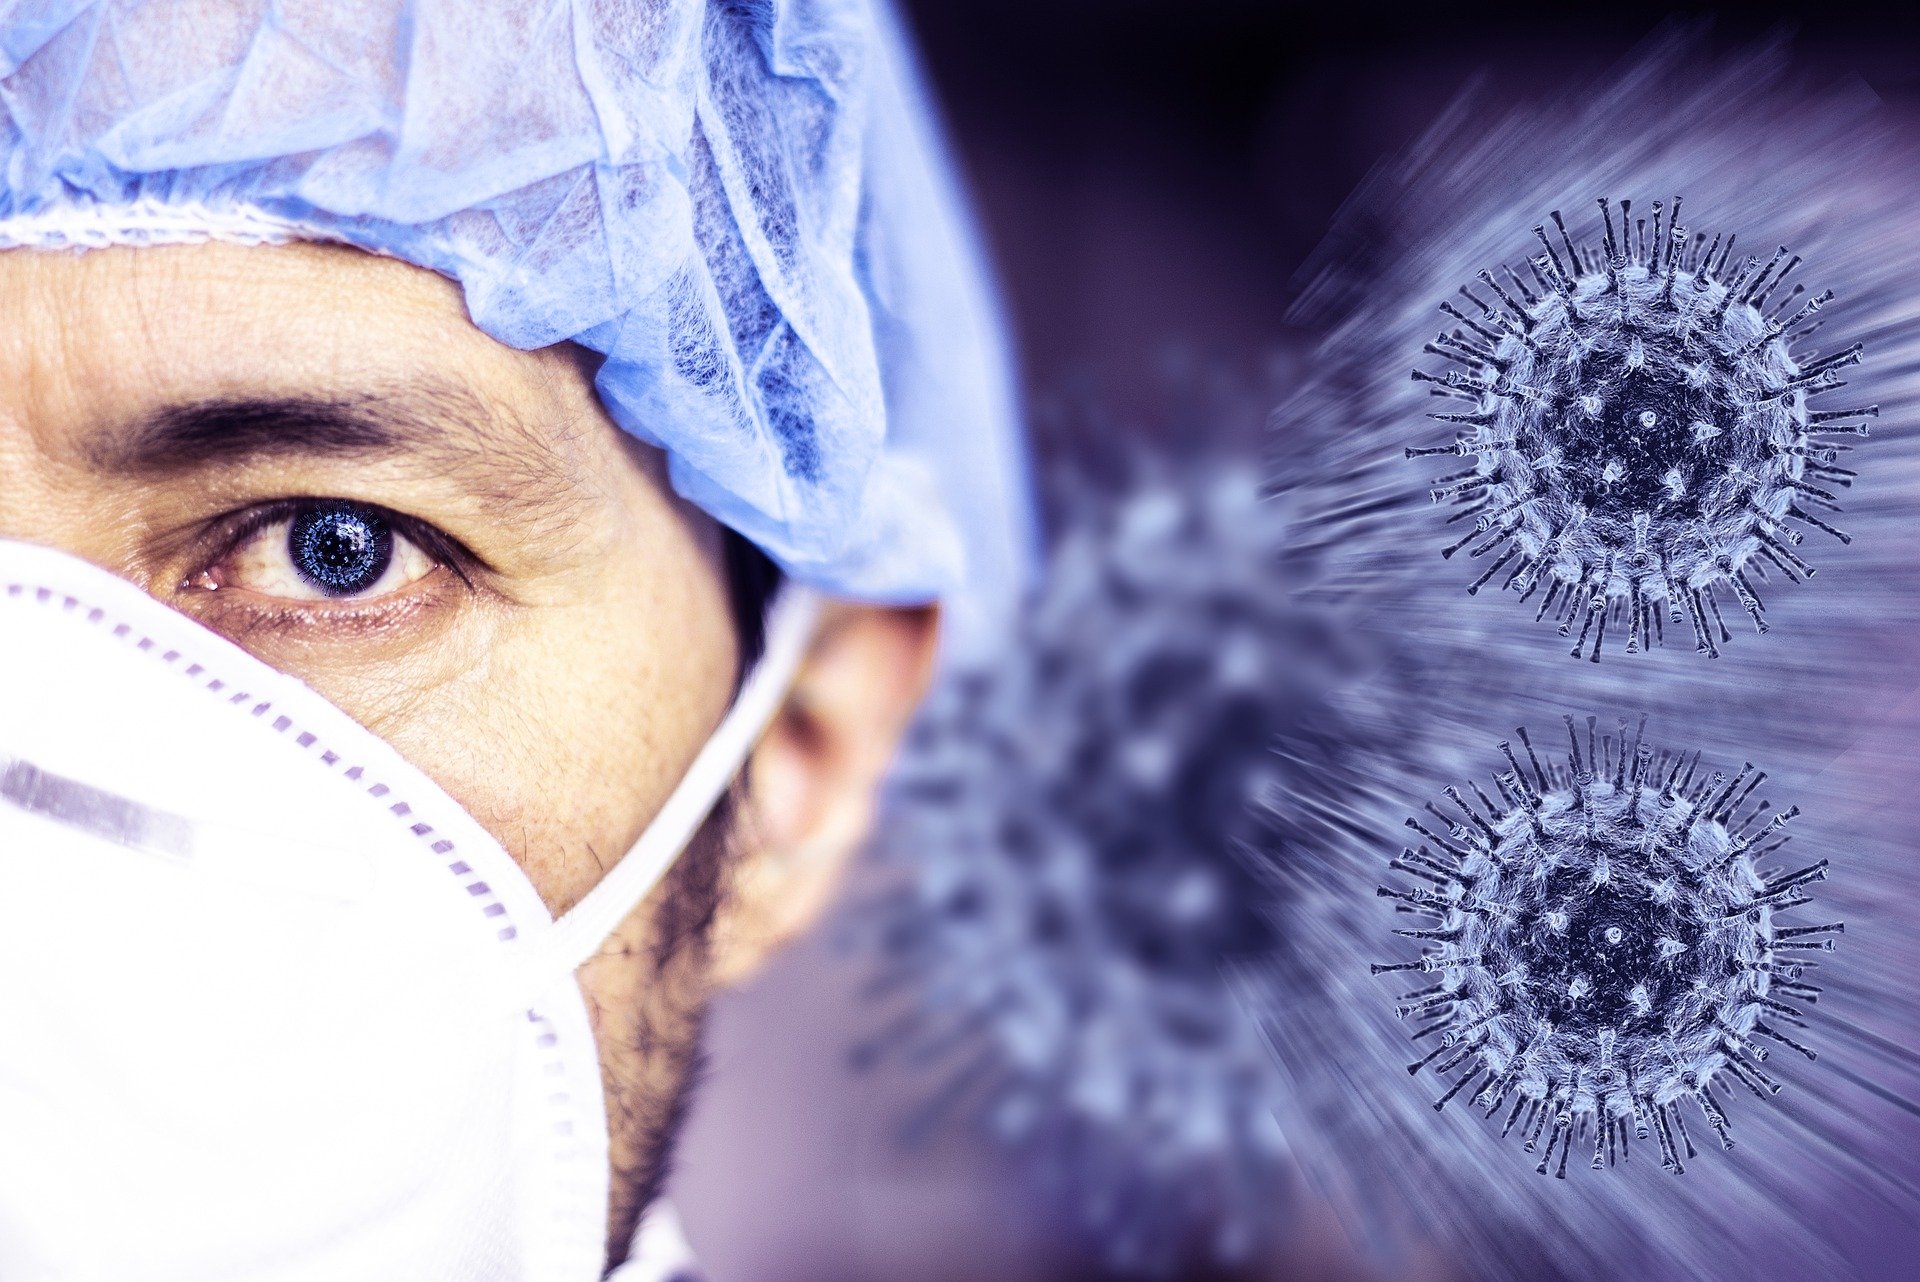 A man with protective wear to prevent the spread of the coronavirus. | Source: Pixabay.